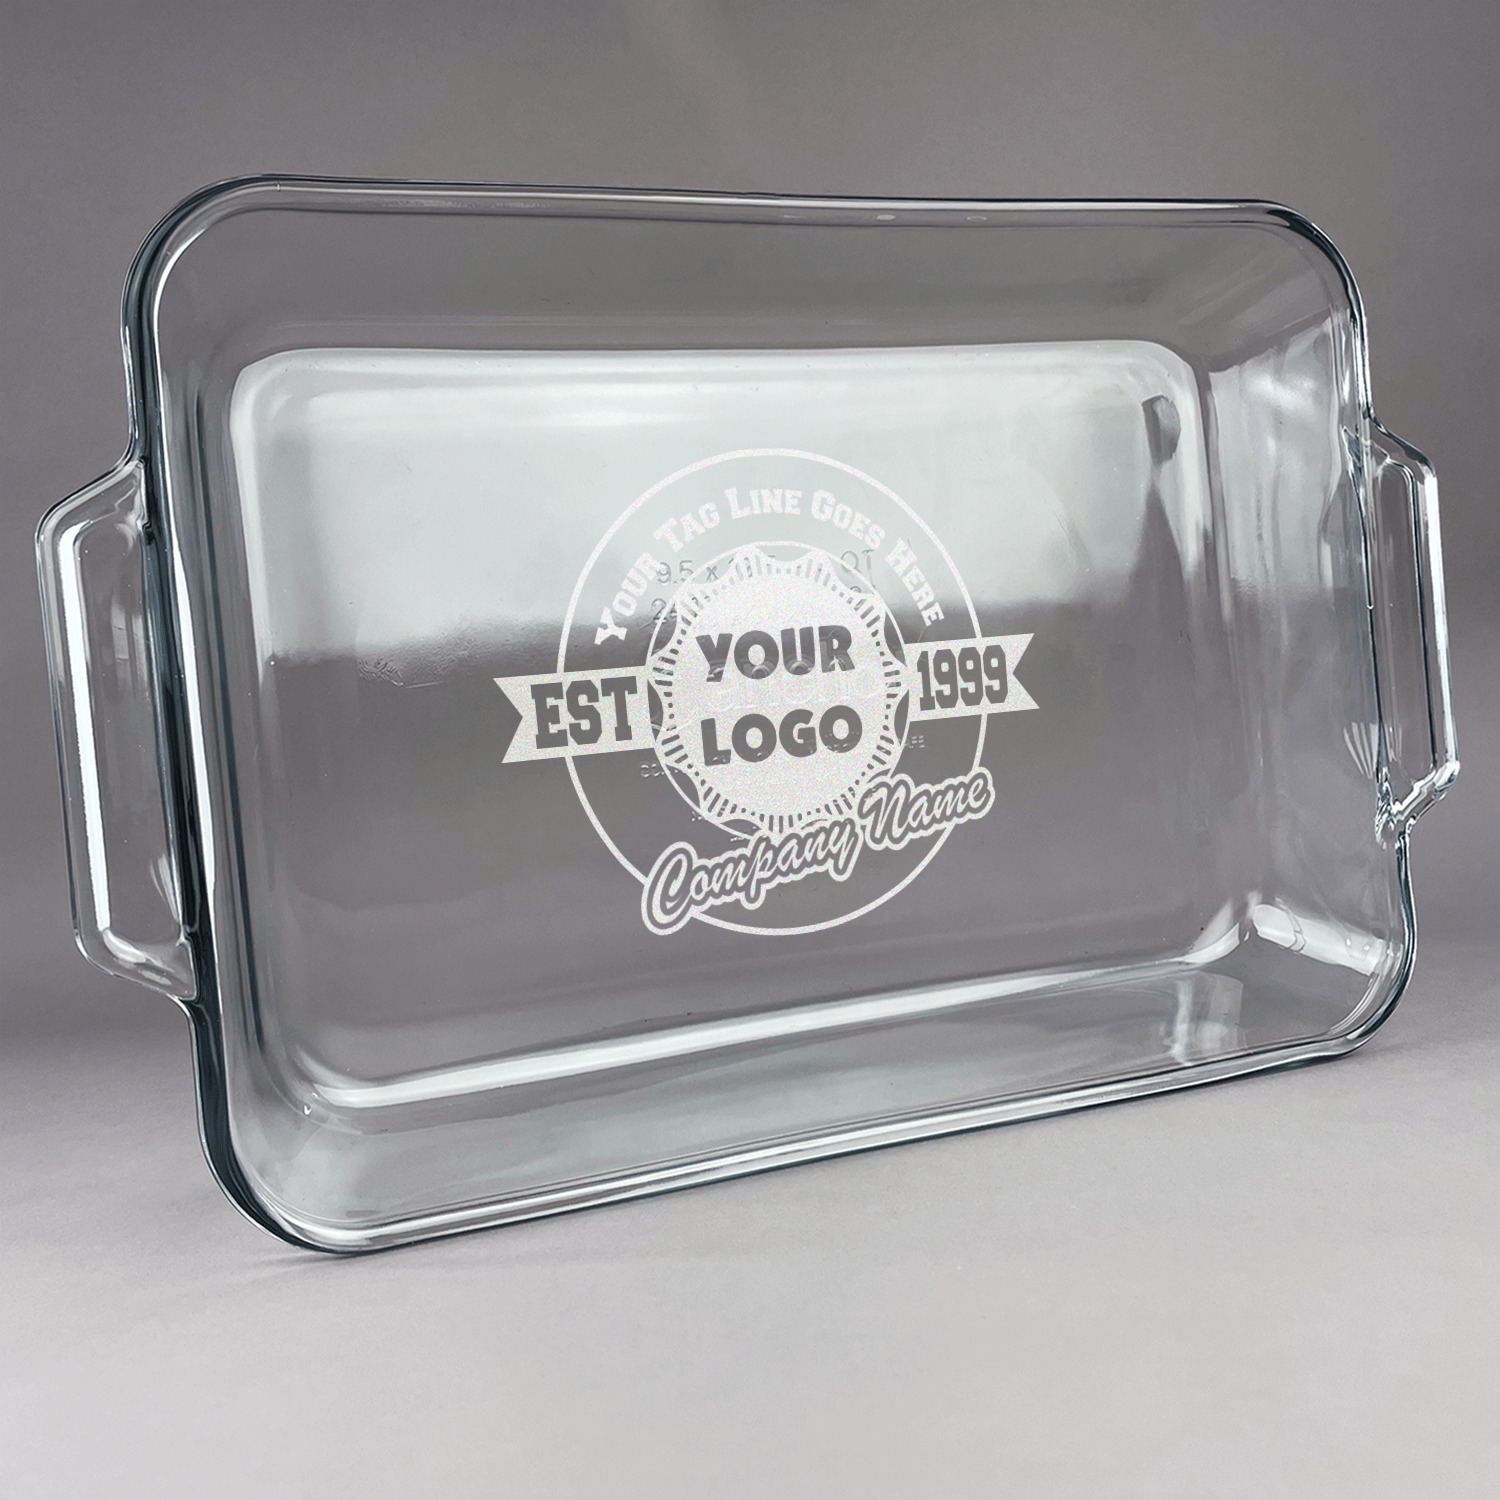 https://www.youcustomizeit.com/common/MAKE/1634642/Logo-Tag-Line-Glass-Baking-Dish-FRONT-13x9.jpg?lm=1688680128